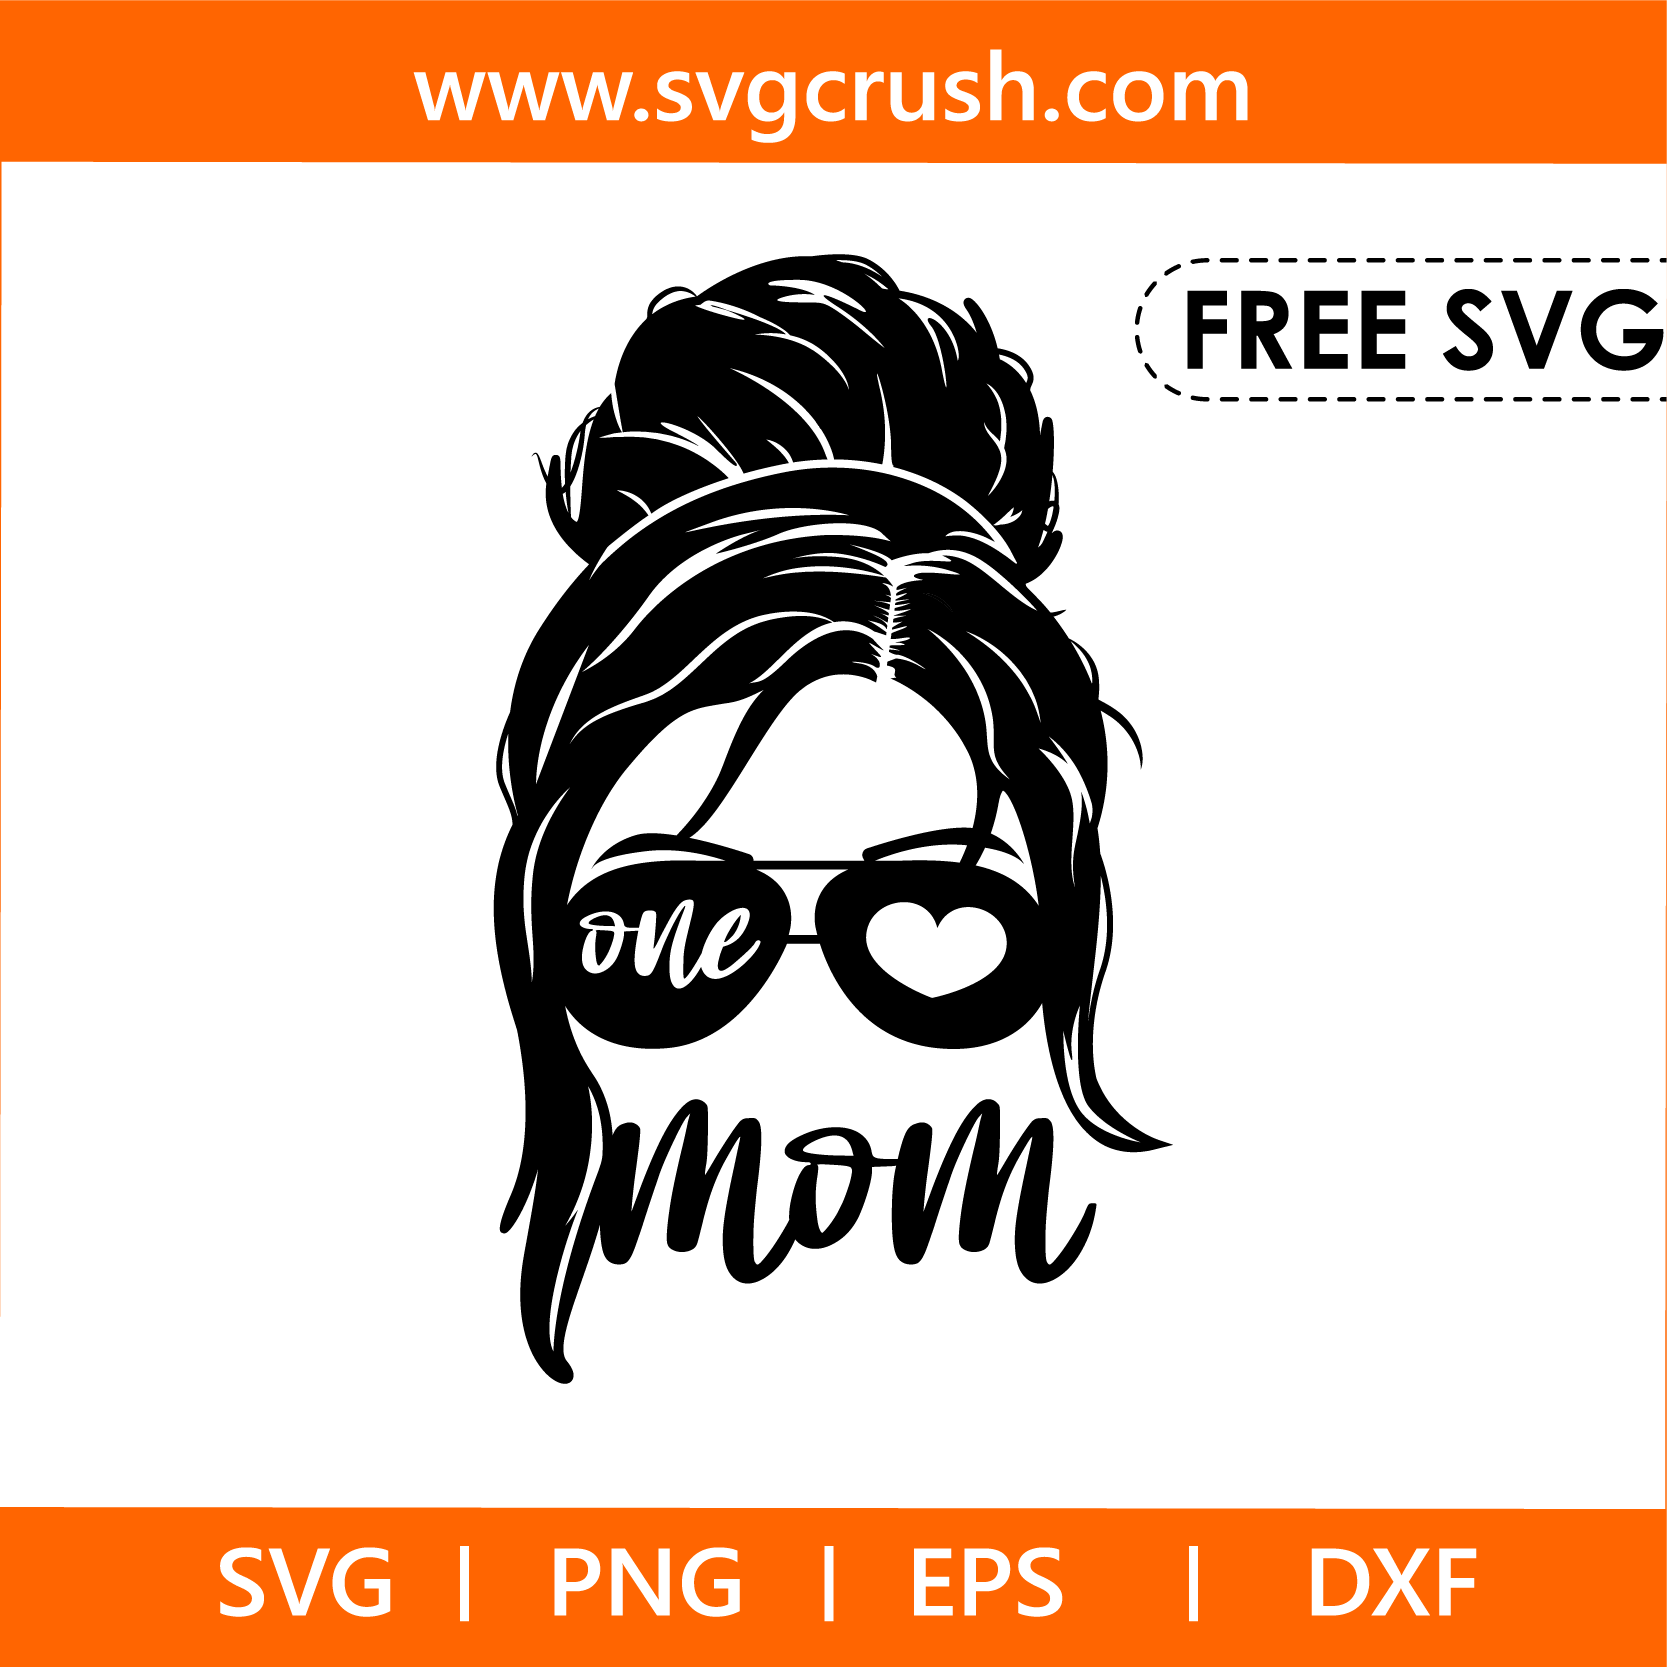 free one-loved-mama-006 svg